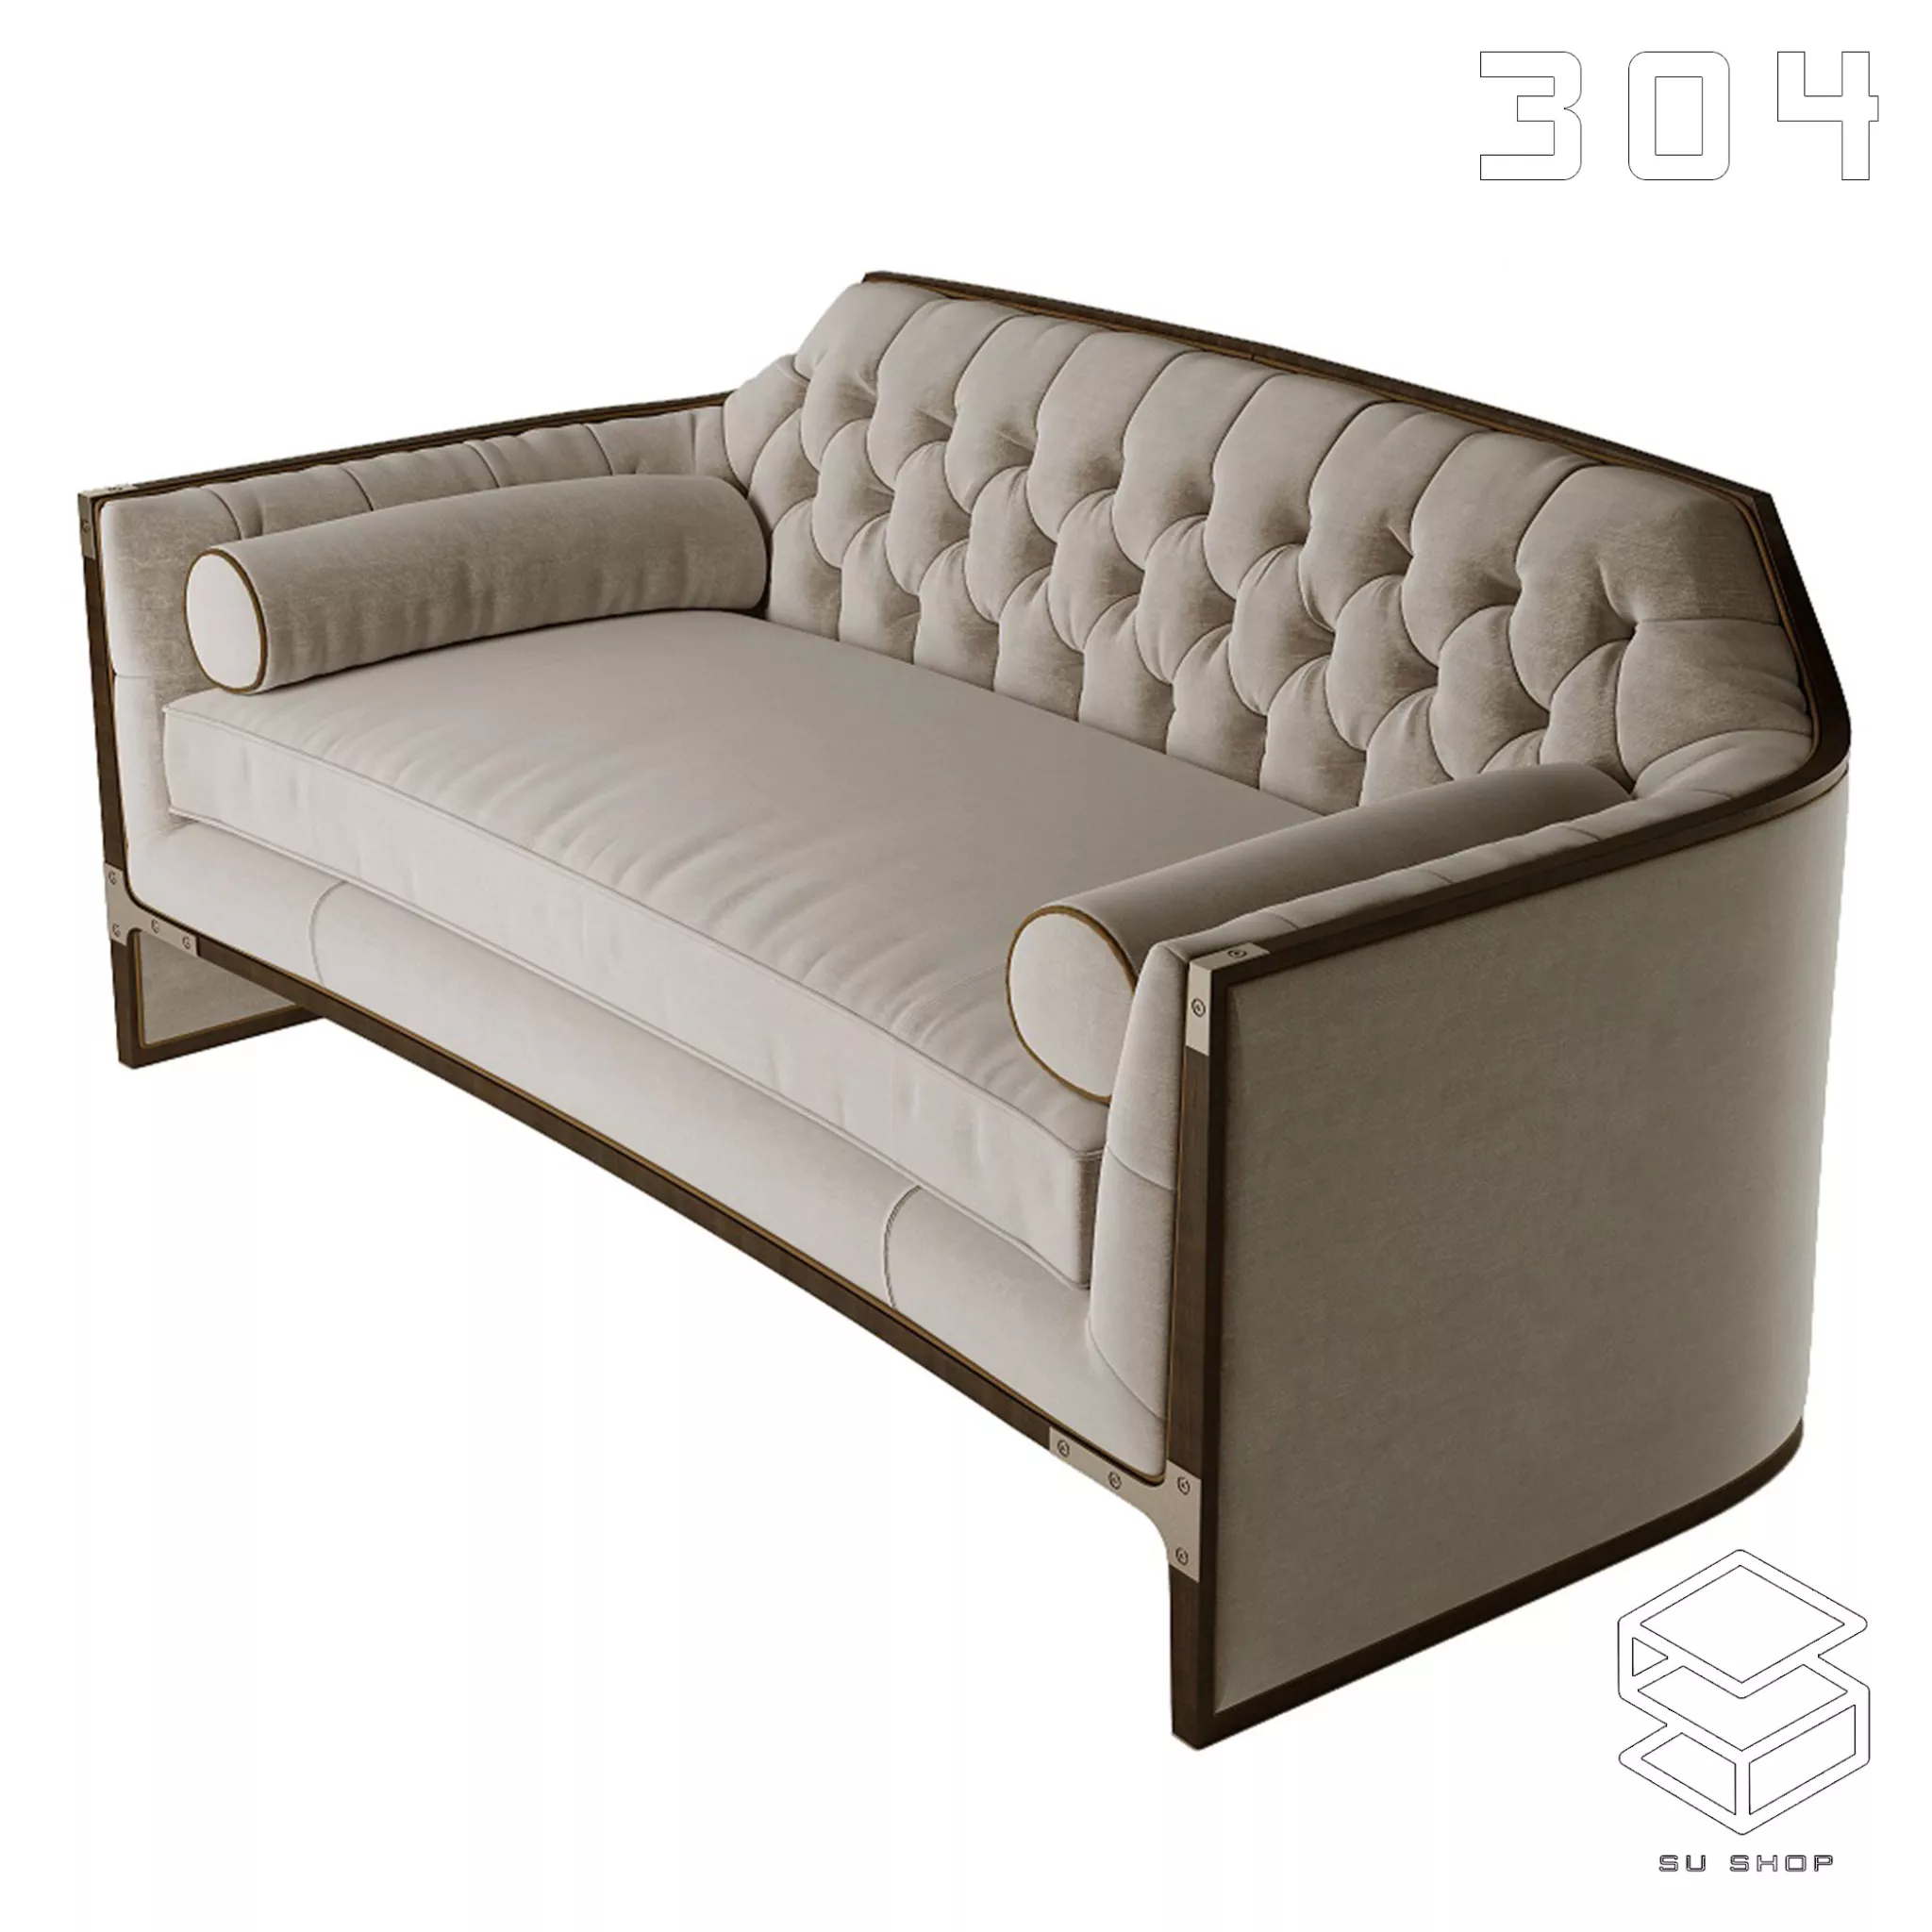 MODERN SOFA - SKETCHUP 3D MODEL - VRAY OR ENSCAPE - ID13613